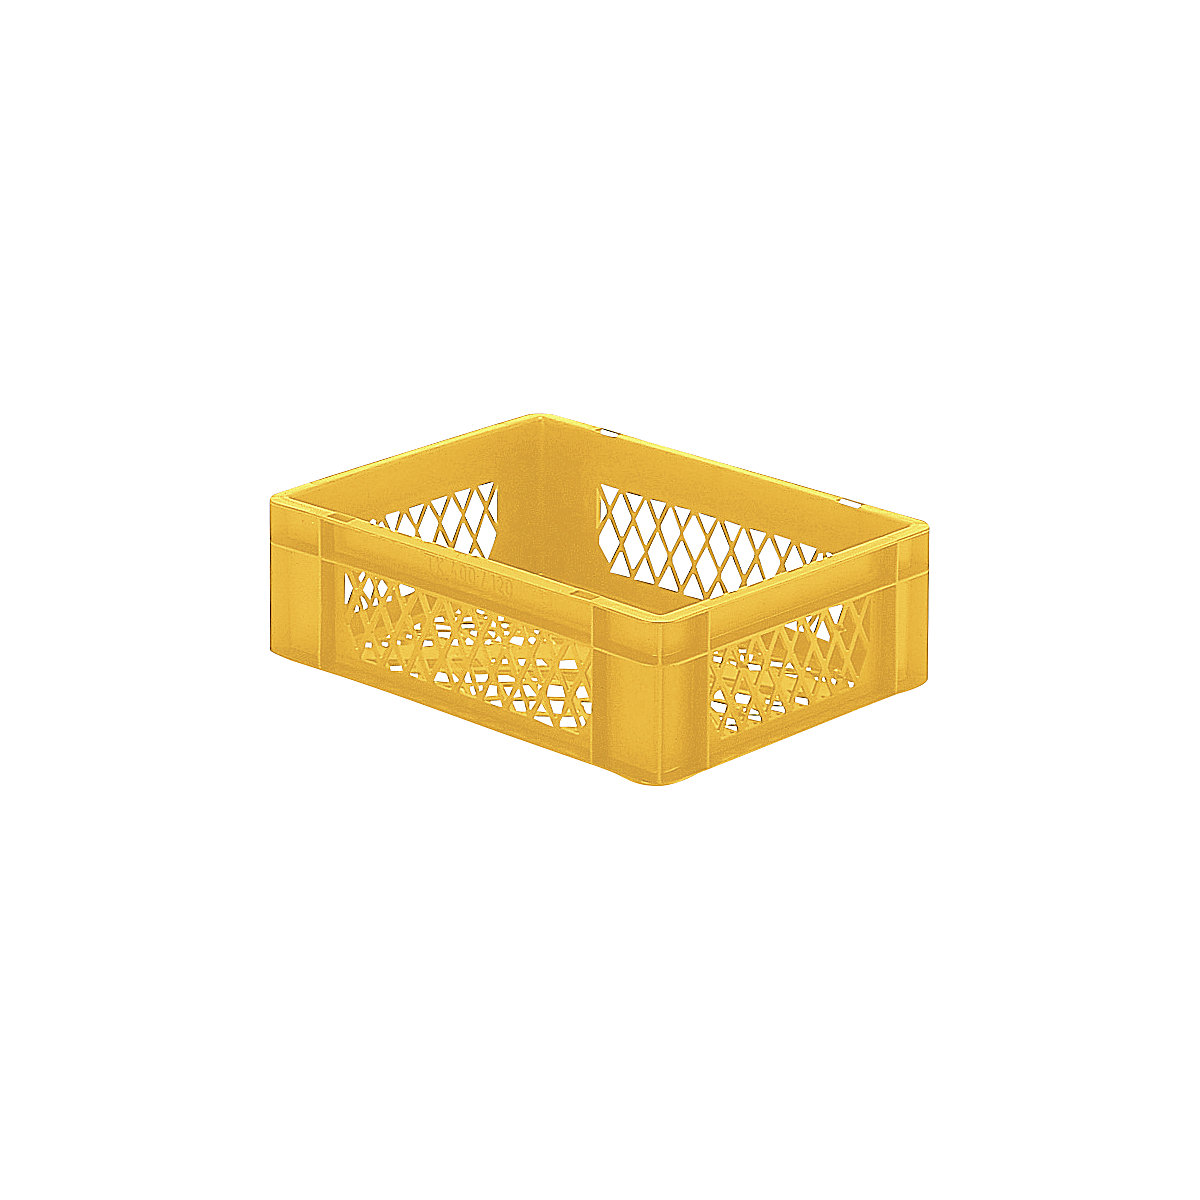 Euro stacking container, perforated walls and base, LxWxH 400 x 300 x 120 mm, yellow, pack of 5